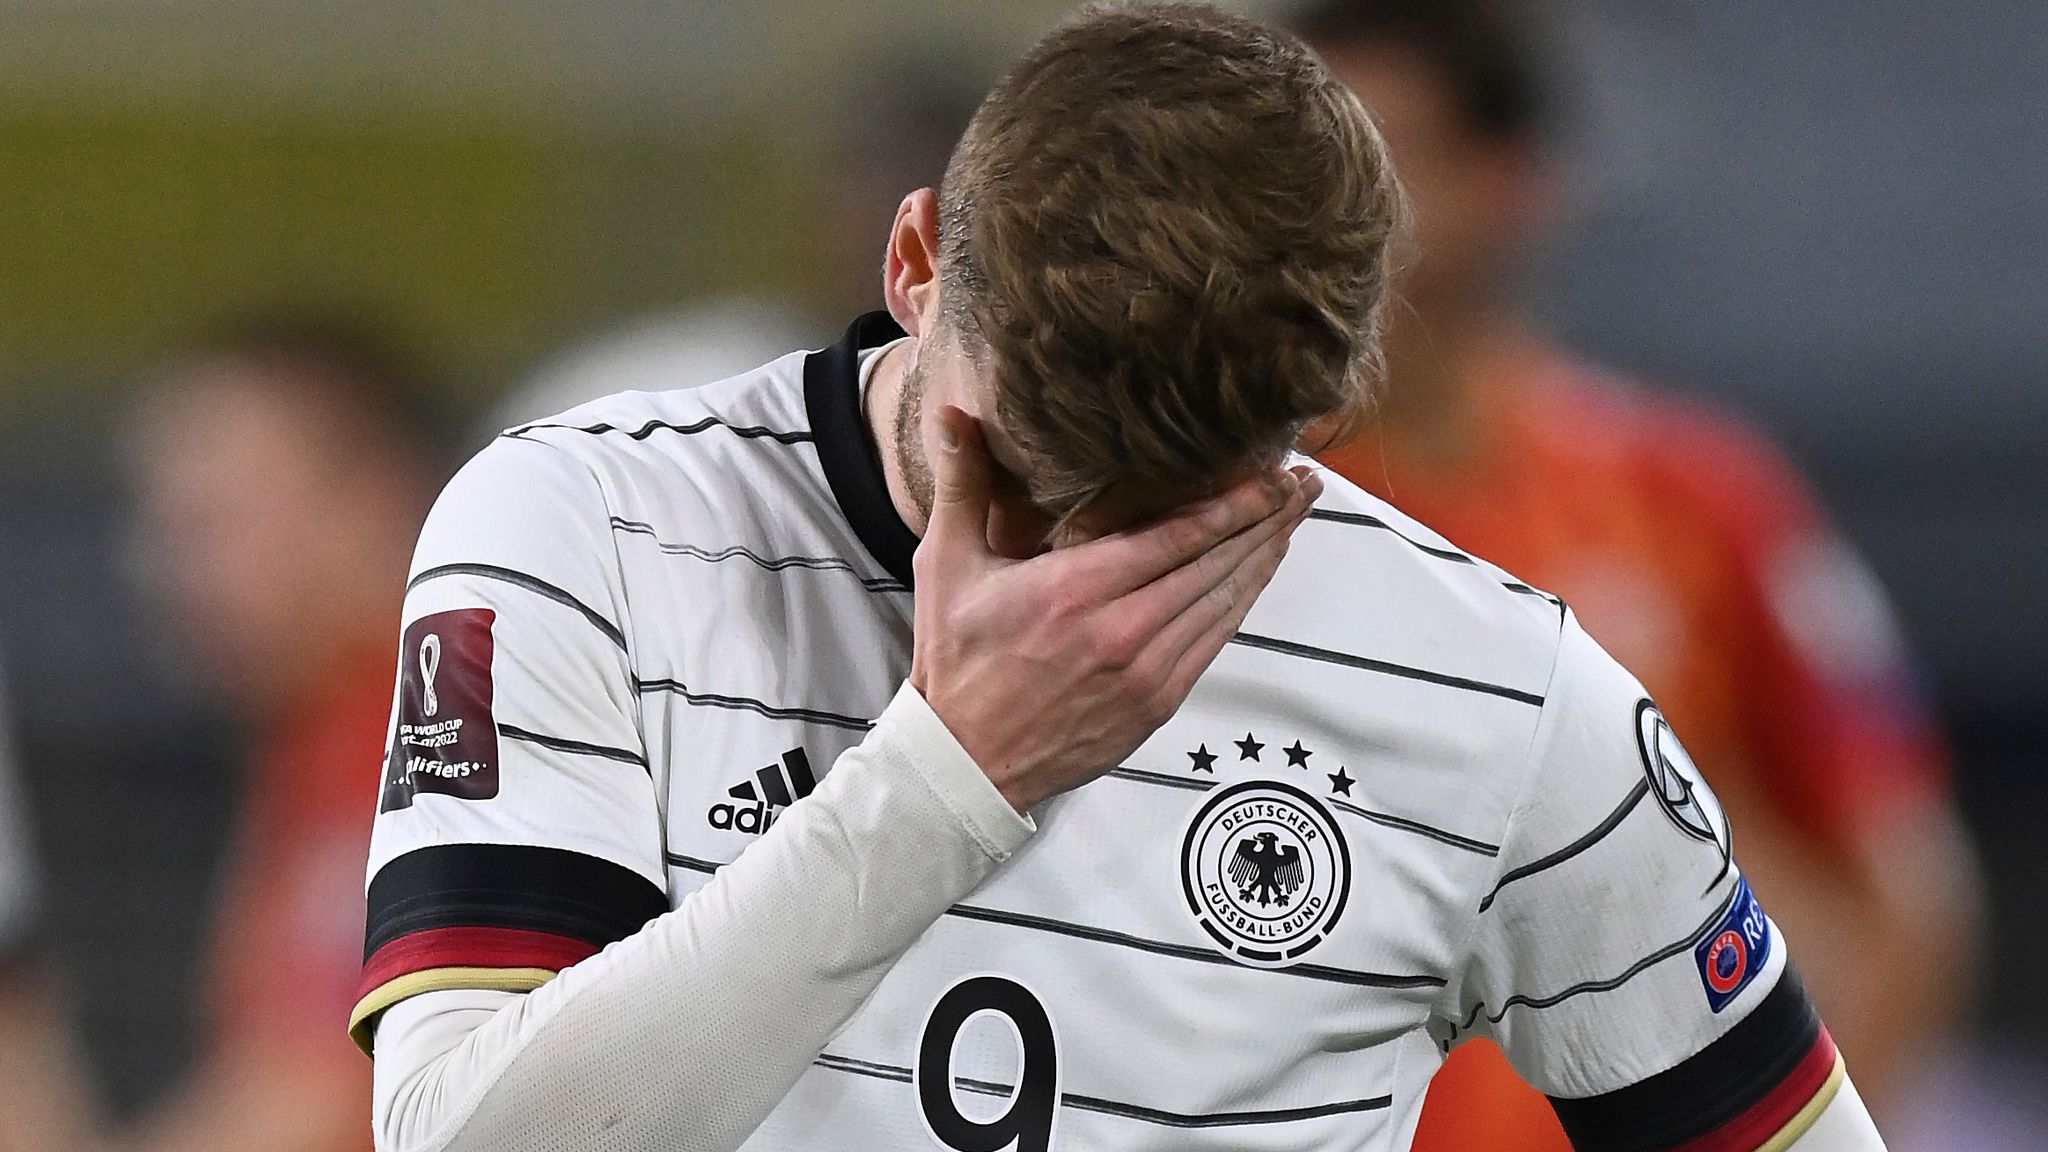 World Cup 2022 Qualifying: Germany stunned by North Macedonia, with wins for Spain, France and Italy